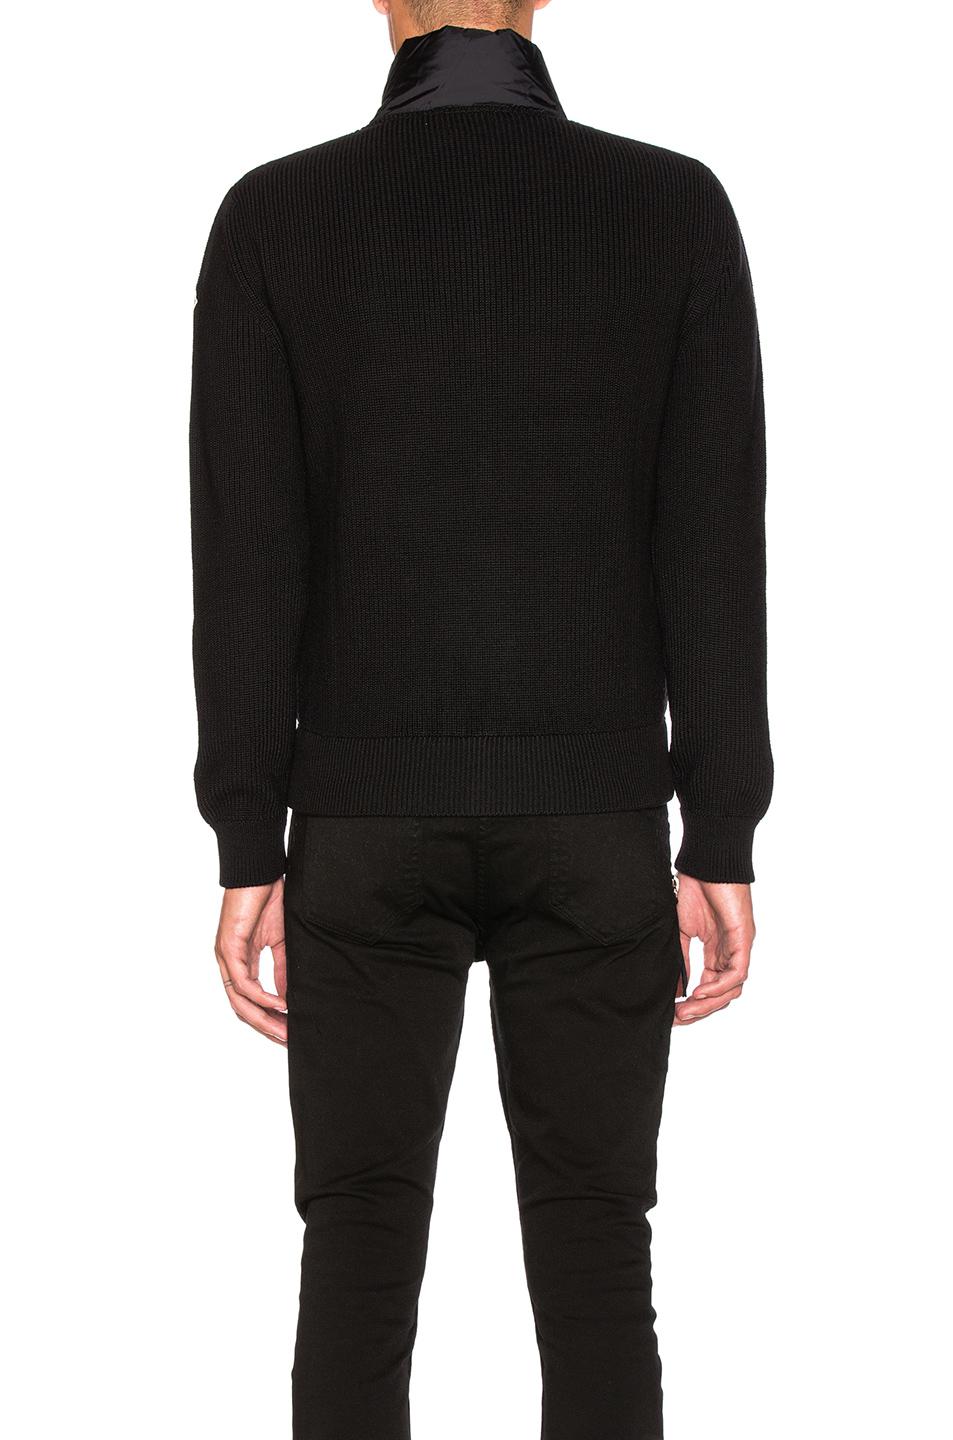 Moncler Synthetic Maglione Tricot Cardigan in Black for Men - Lyst